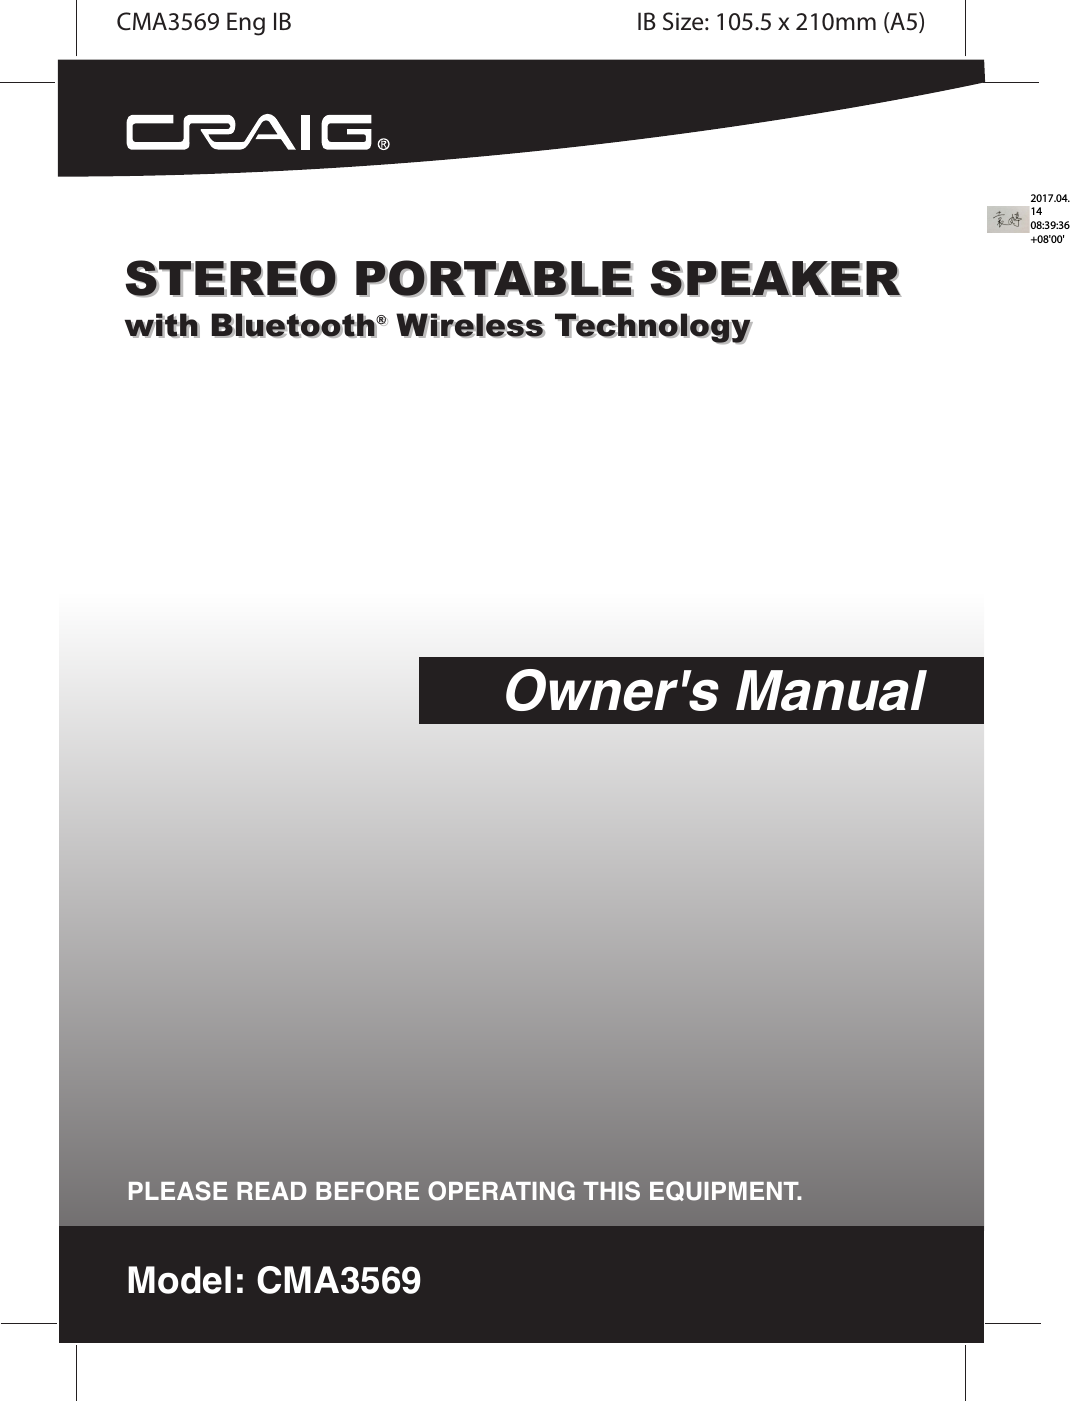 Model: CMA3569Owner&apos;s ManualPLEASE READ BEFORE OPERATING THIS EQUIPMENT.STEREO PORTABLE SPEAKERwith Bluetooth® Wireless TechnologySTEREO PORTABLE SPEAKERwith Bluetooth® Wireless TechnologyCMA3569 Eng IB IB Size: 105.5 x 210mm (A5)2017.04.14 08:39:36 +08&apos;00&apos;